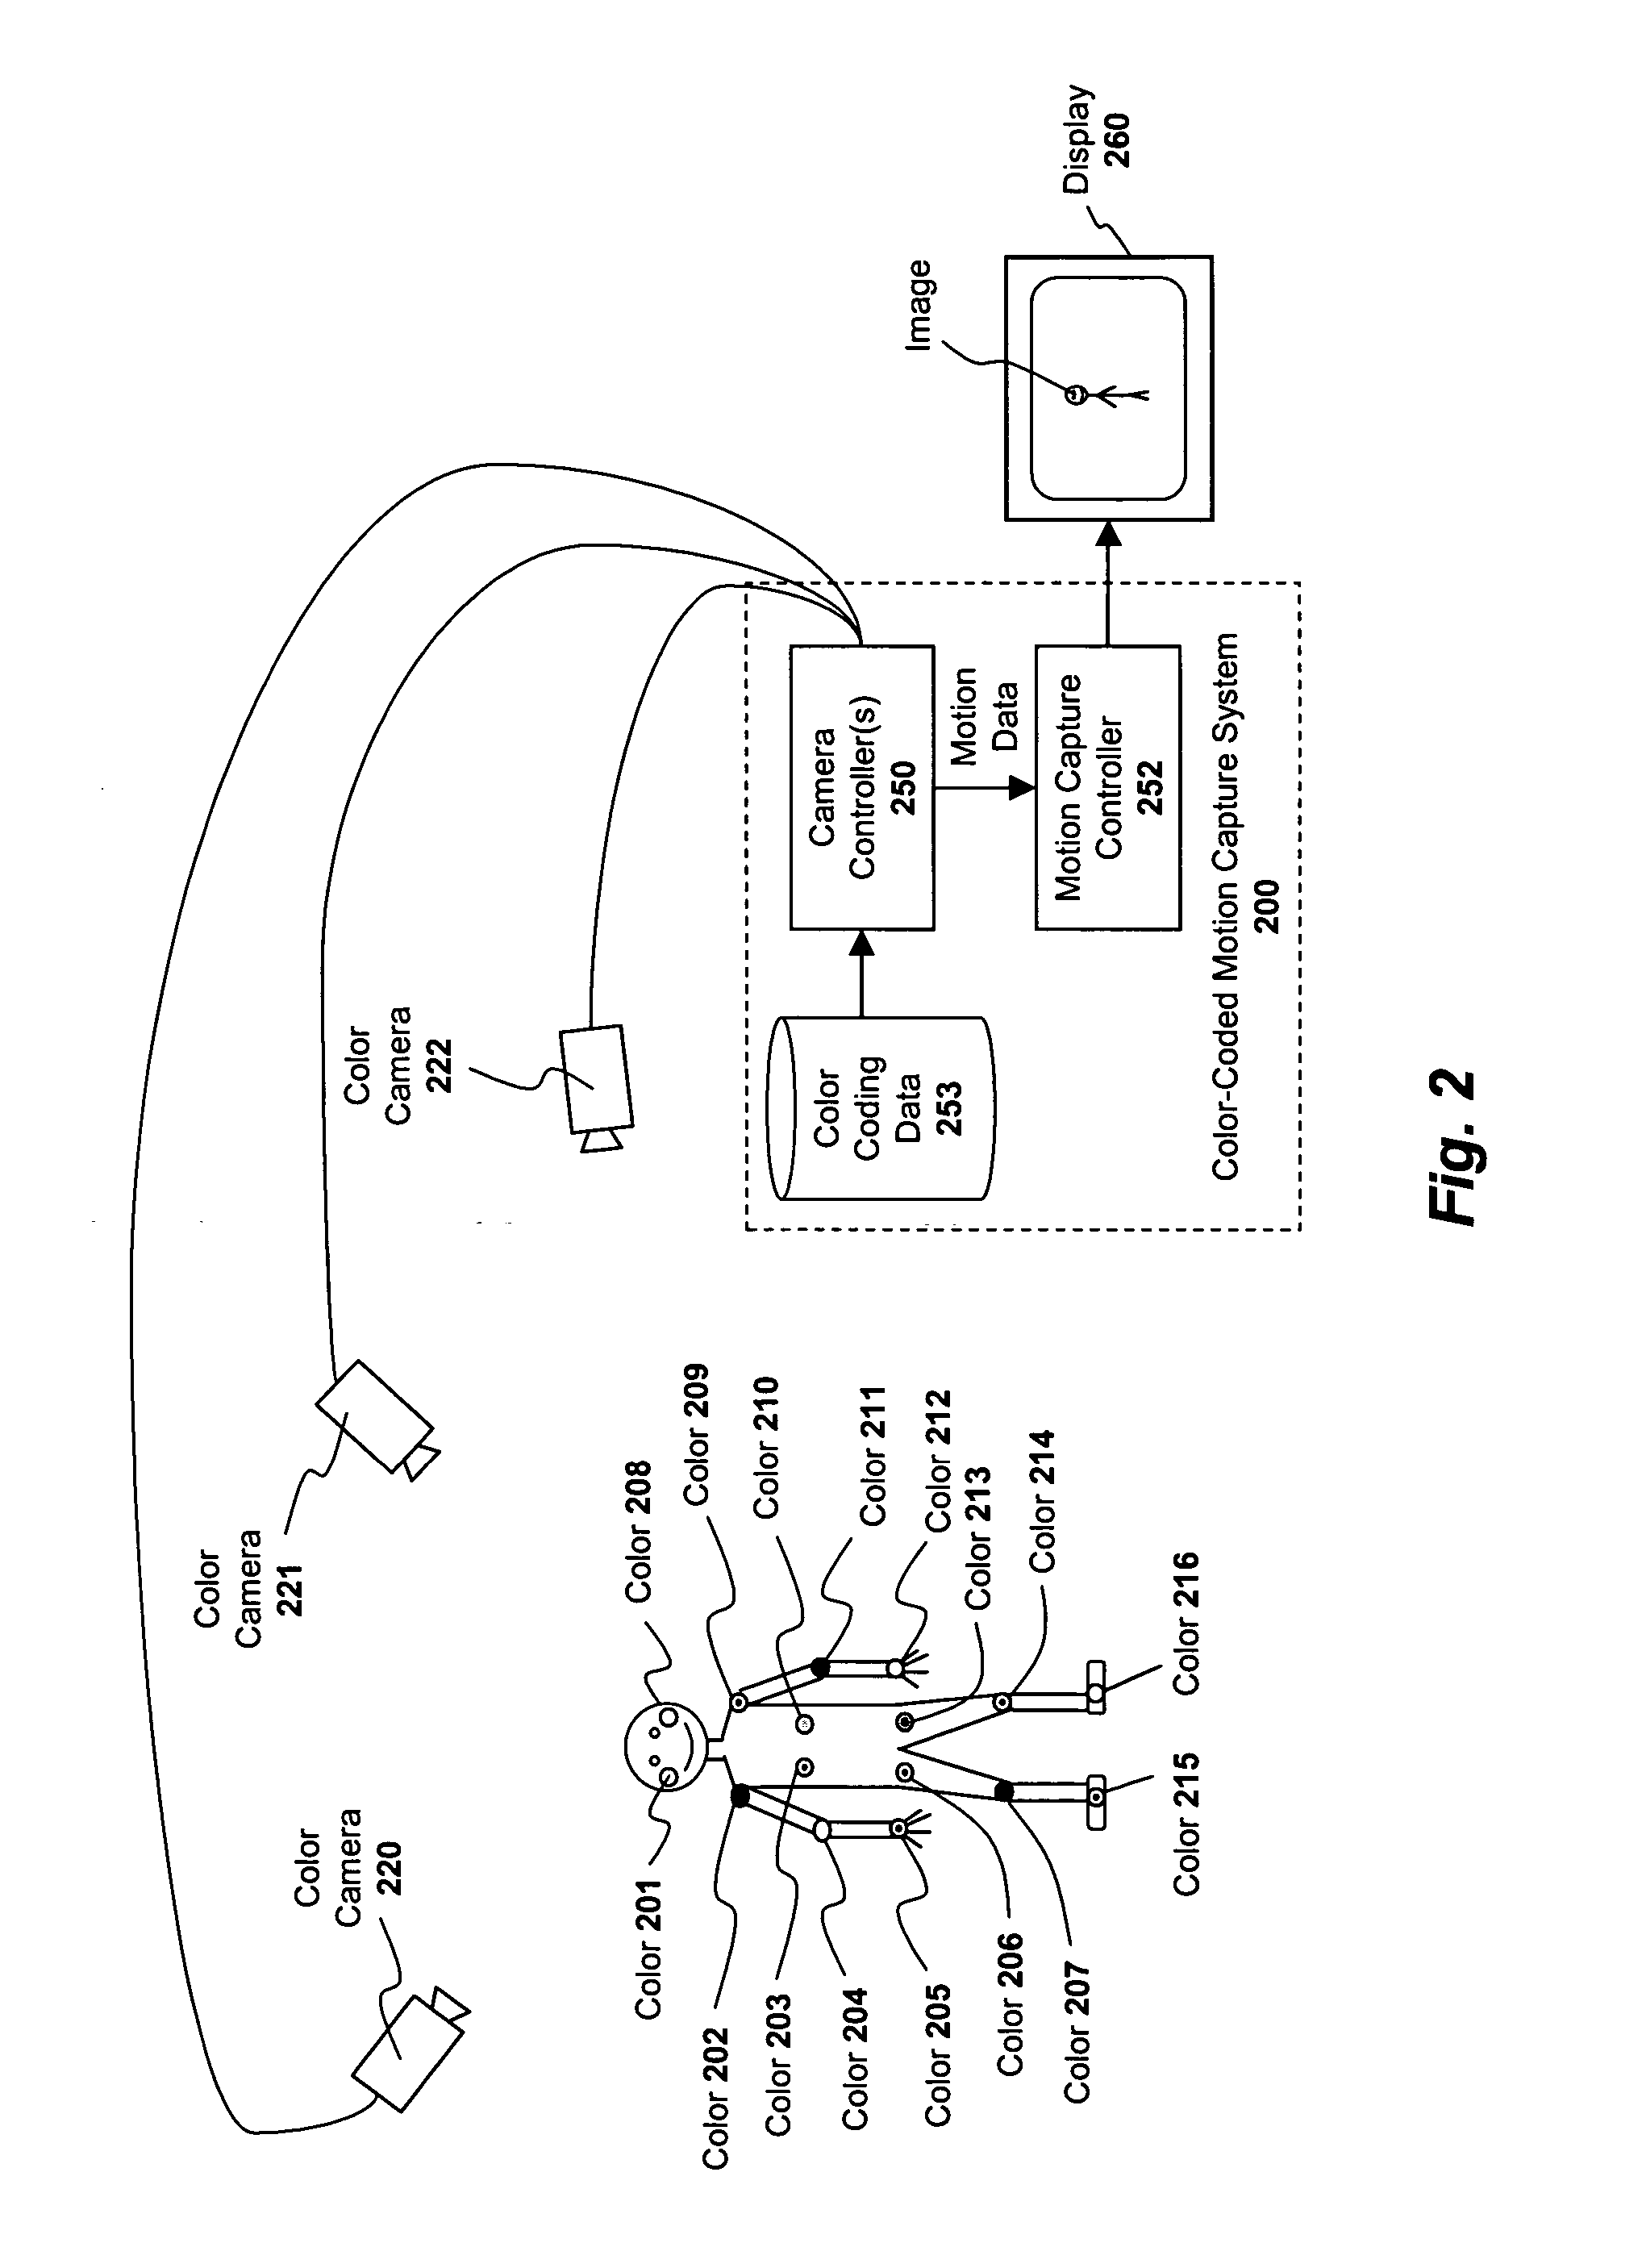 Apparatus and method for capturing the motion of a performer